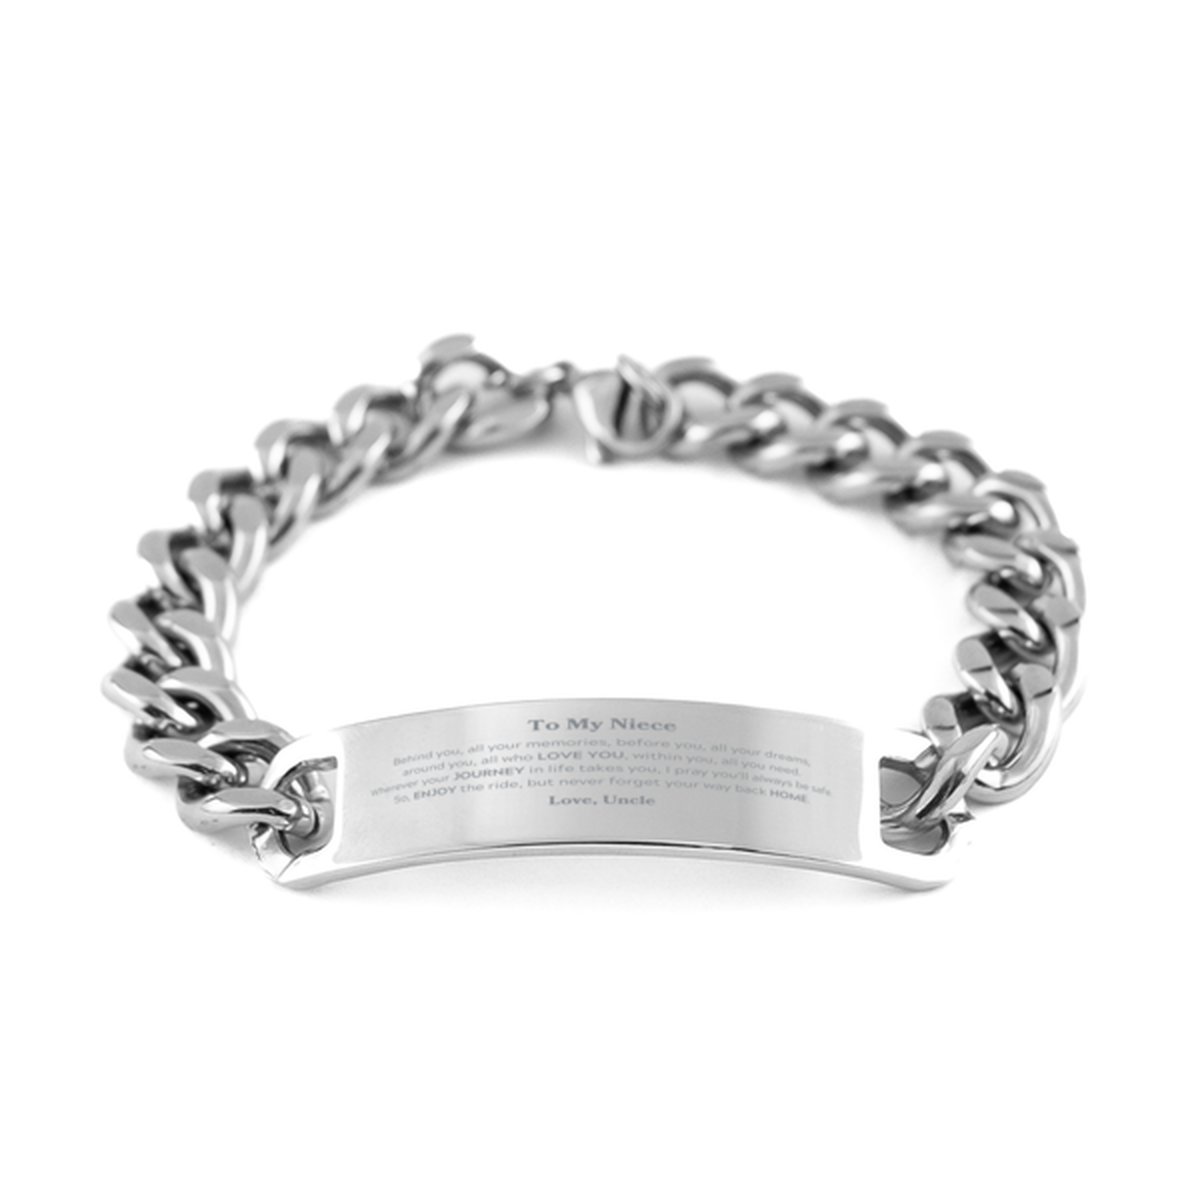 To My Niece Graduation Gifts from Uncle, Niece Cuban Chain Stainless Steel Bracelet Christmas Birthday Gifts for Niece Behind you, all your memories, before you, all your dreams. Love, Uncle